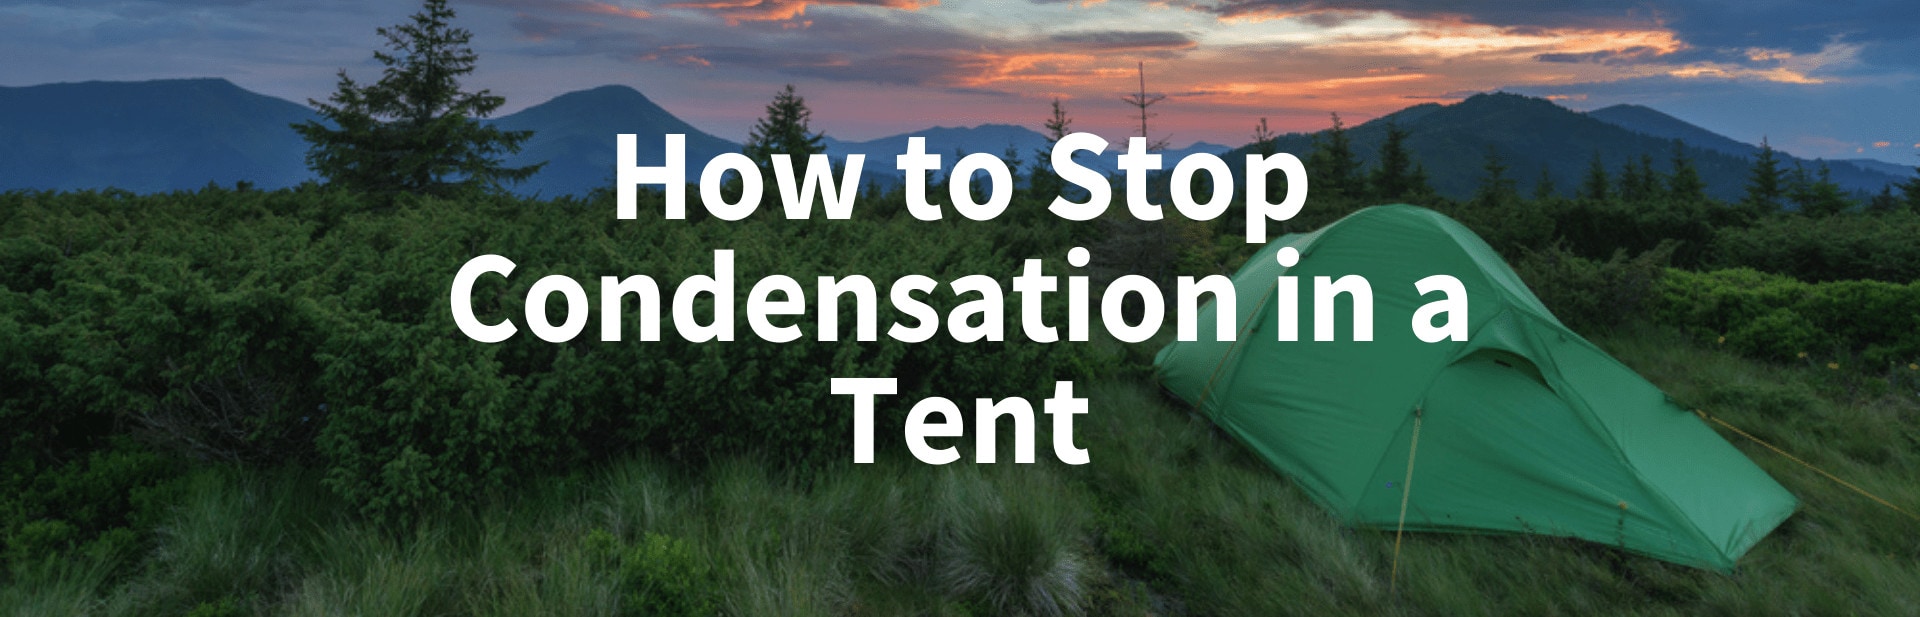 How To Stop Condensation In A Tent:  11 Top Tips